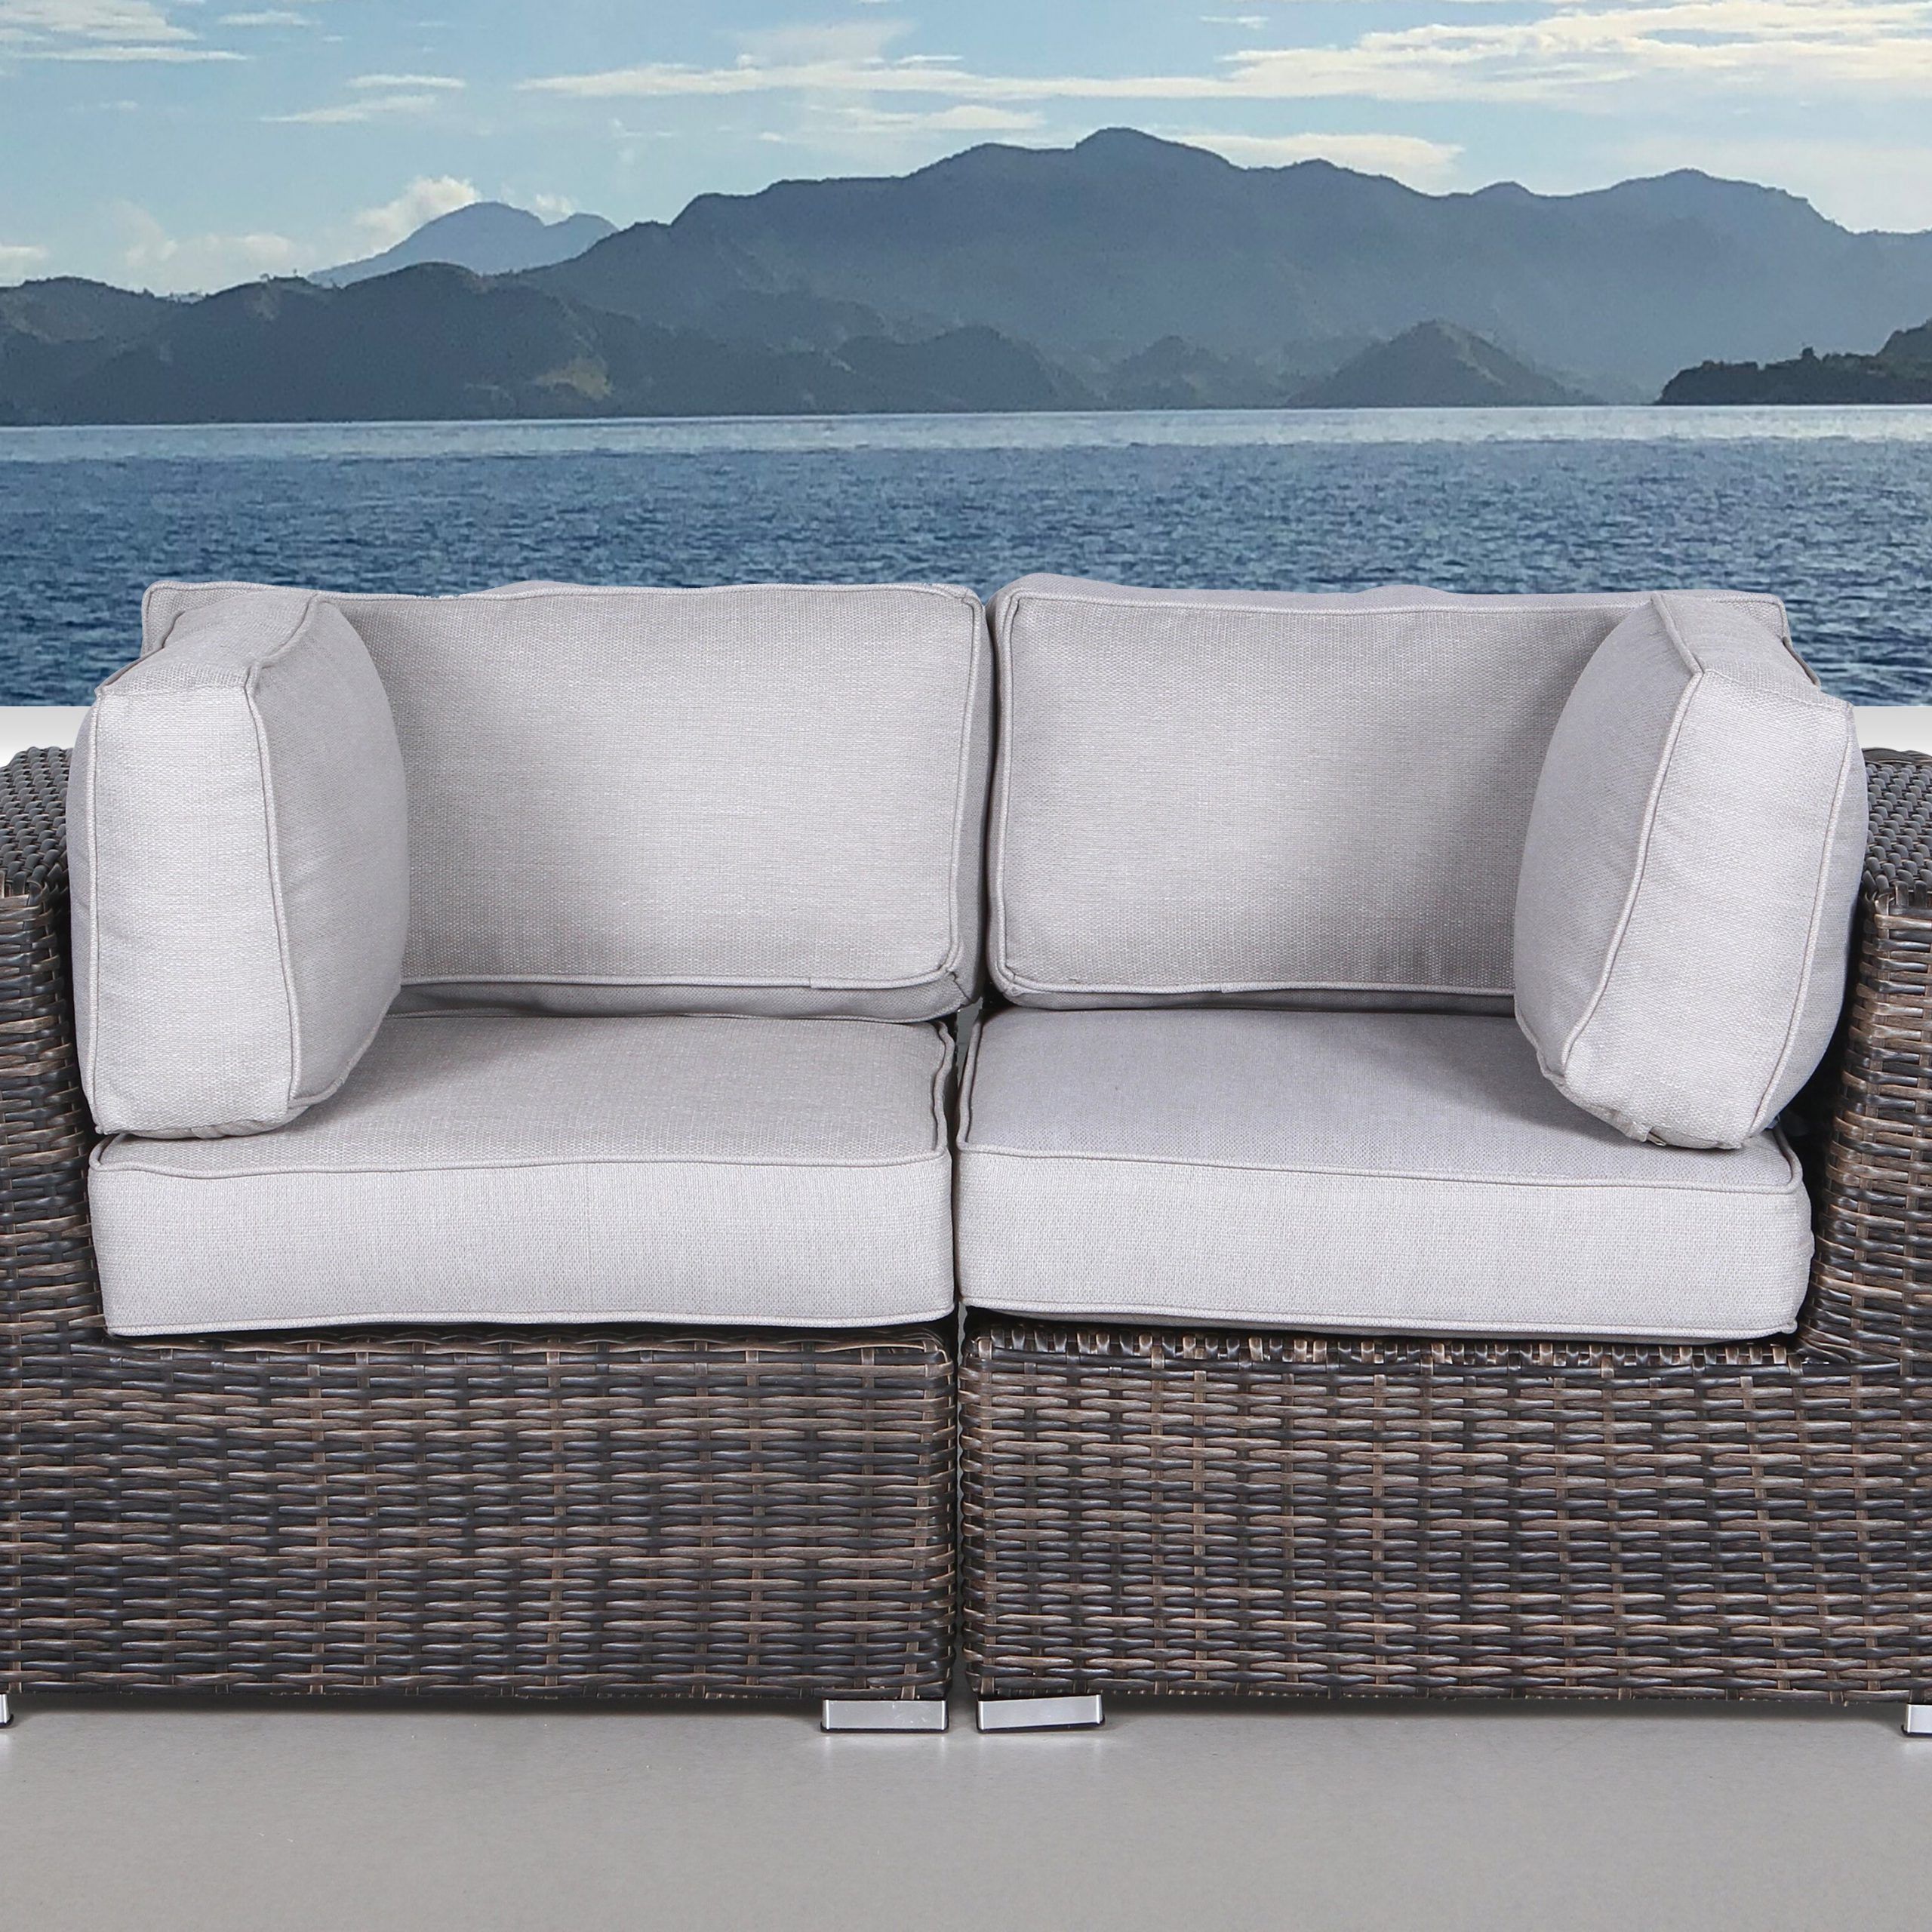 Dayse Contemporary Loveseat With Cushion For Recent Dayse Loveseats With Cushion (View 2 of 25)